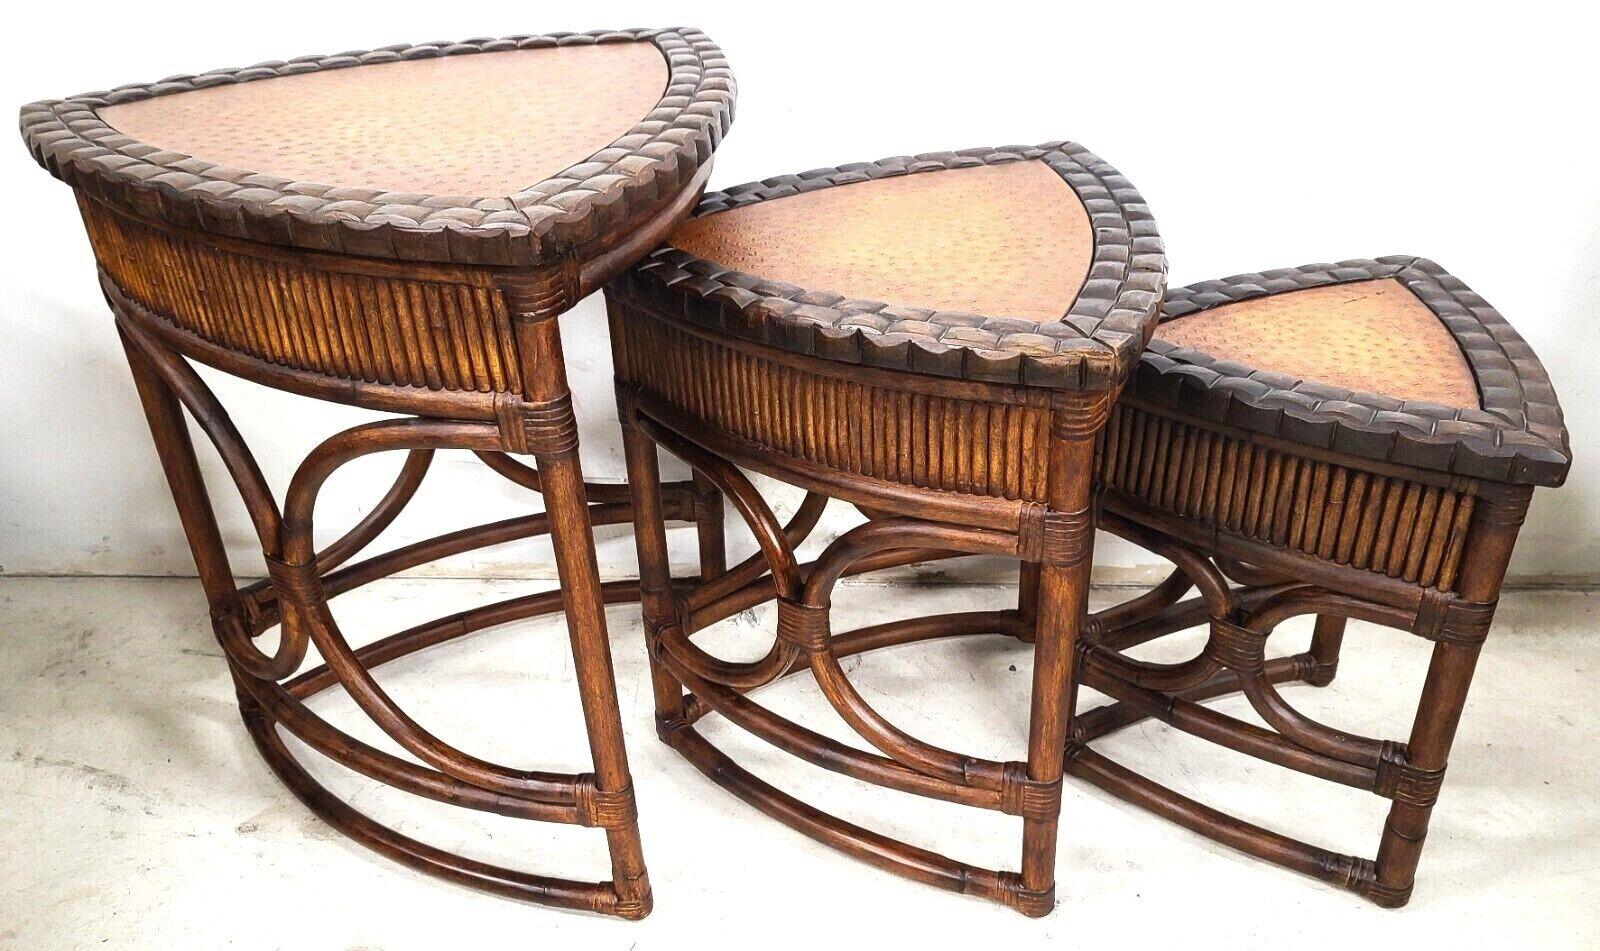 Vintage Bamboo Rattan Coconut Shell Ostrich Nesting Tables, Set of 3 In Good Condition For Sale In Lake Worth, FL